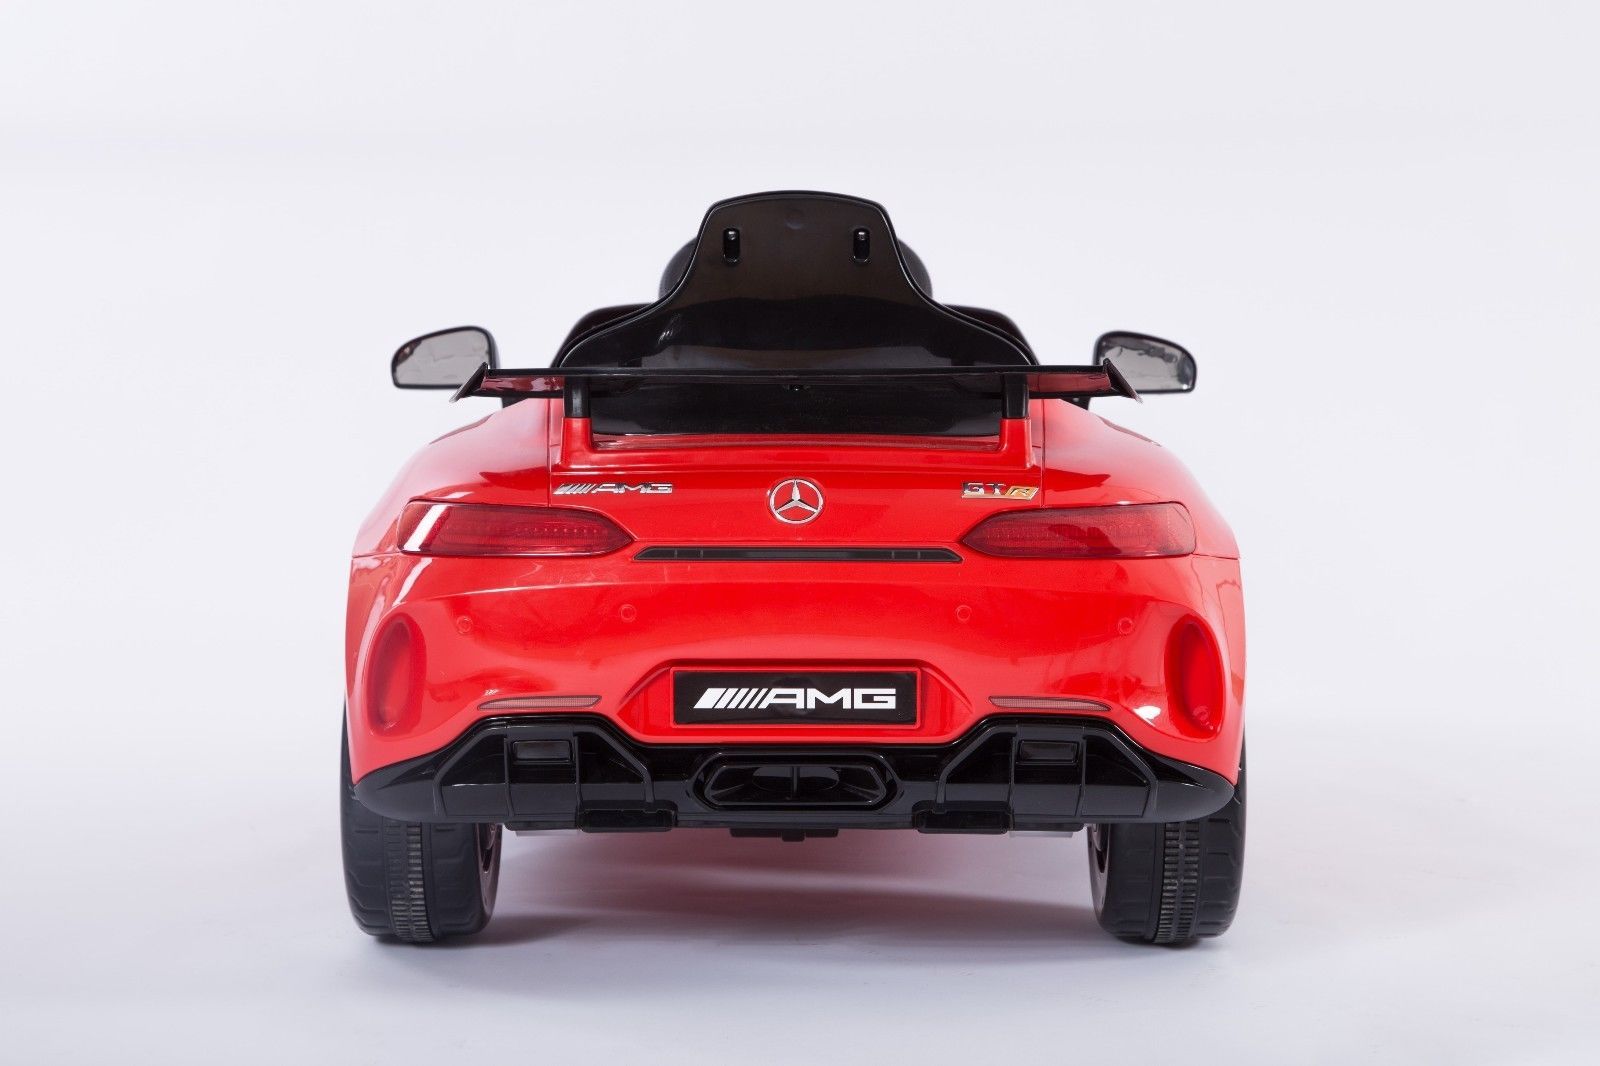 RiiRoo Mercedes Benz AMG GT R Ride On Car in red back view2